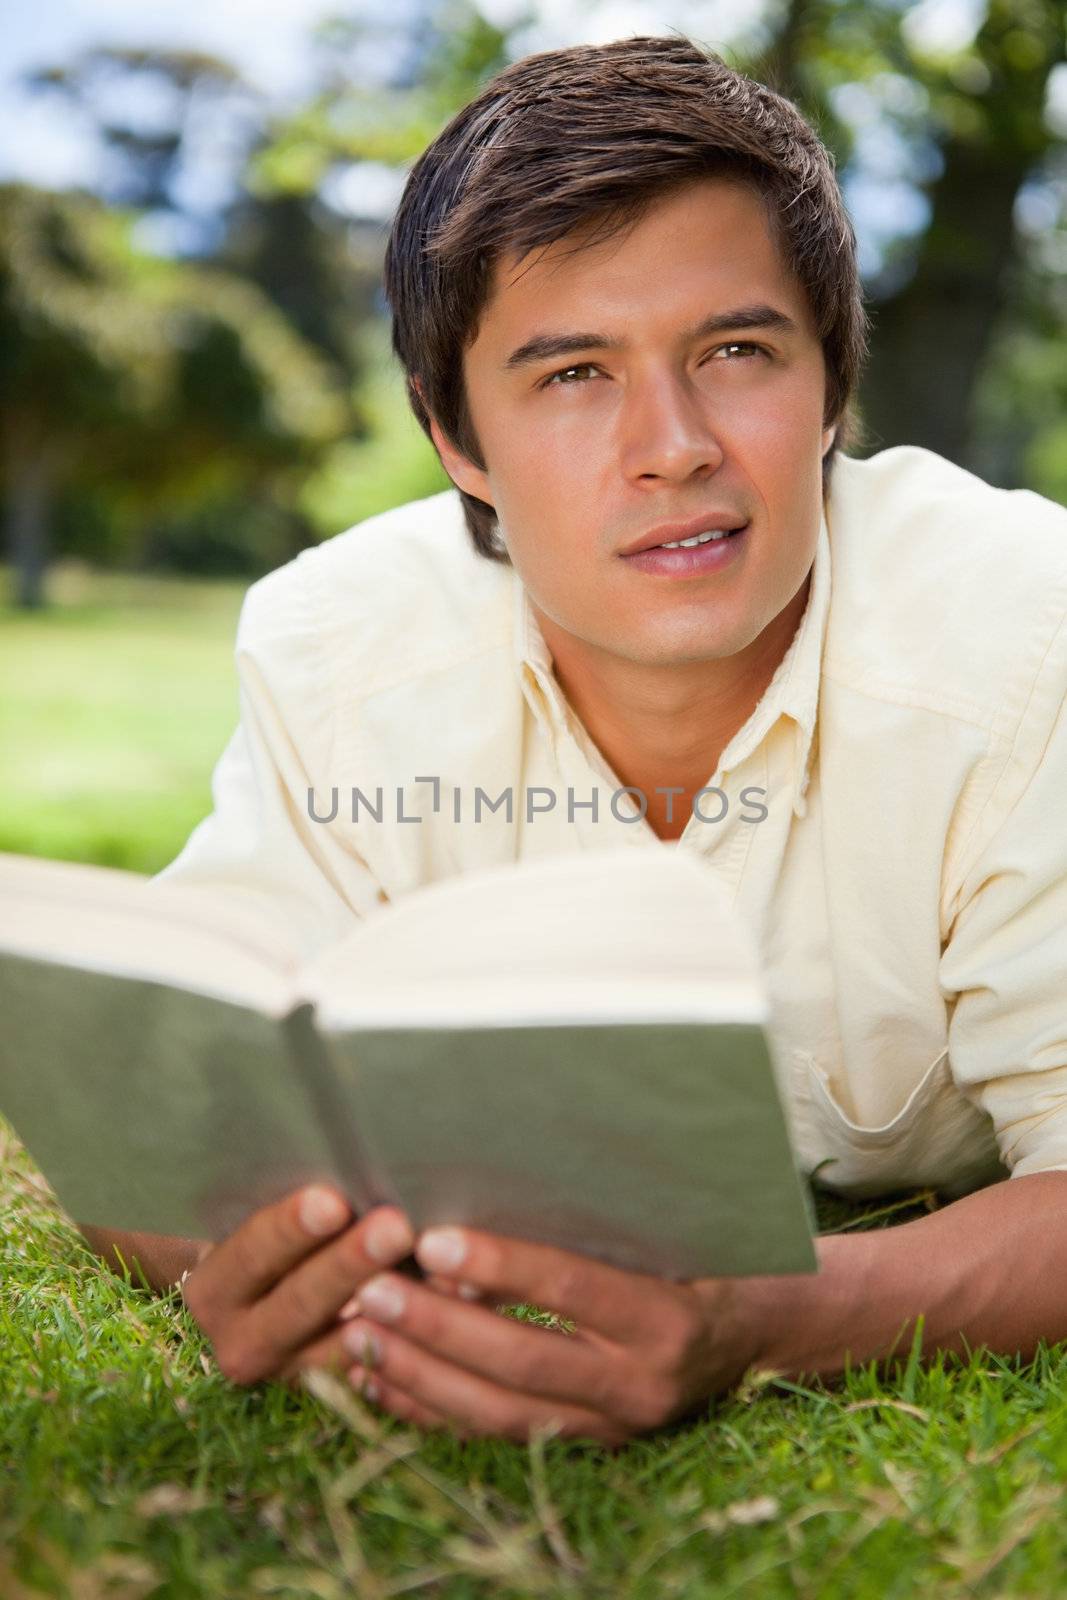 Man looking into the distance while reading a book as he lies prone in the grass